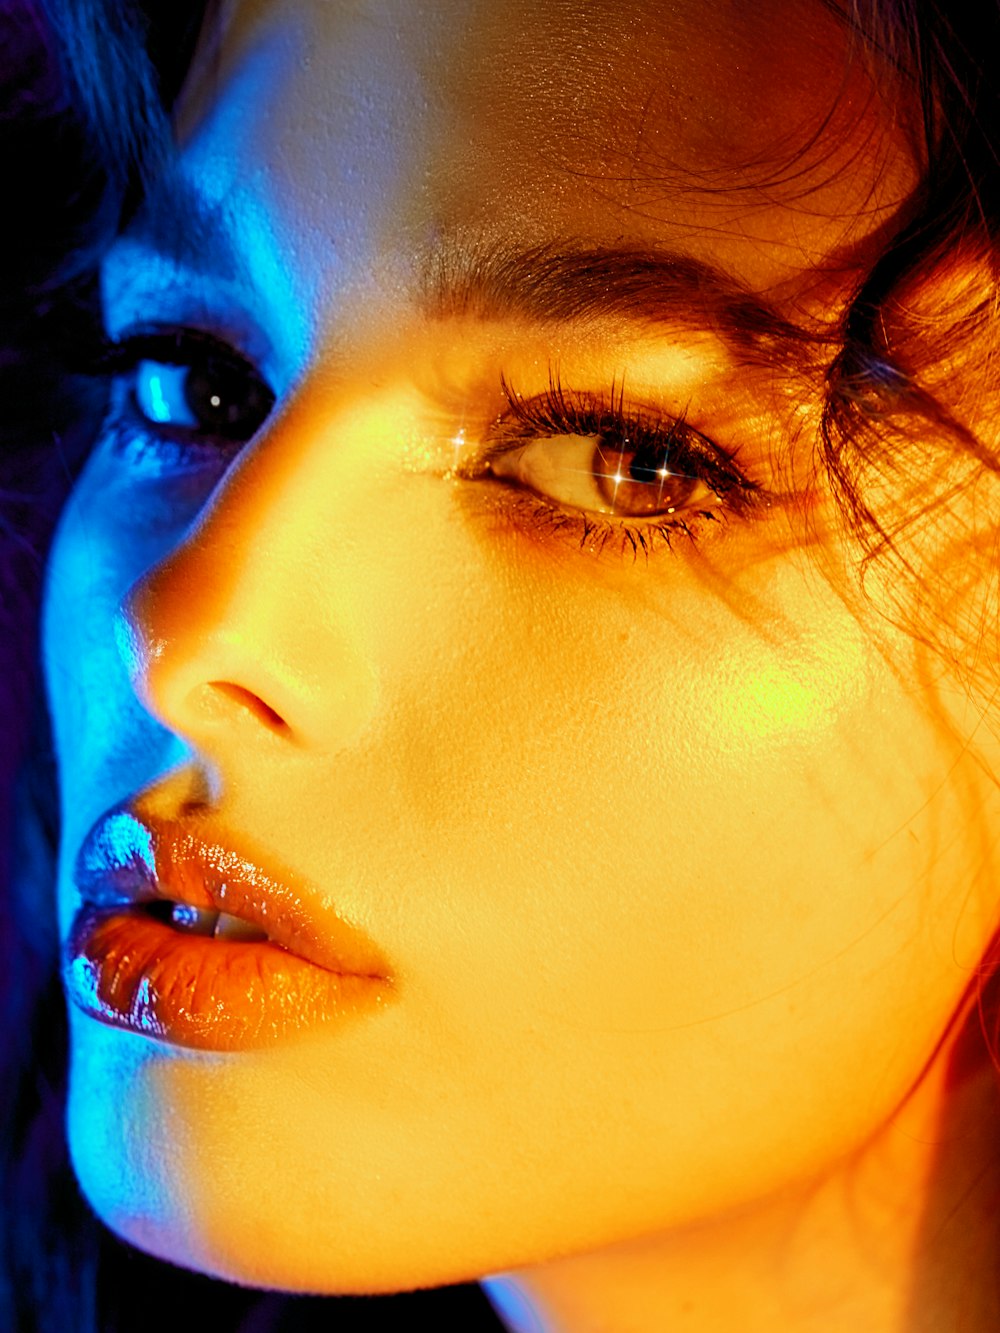 a close up of a woman's face with bright lighting